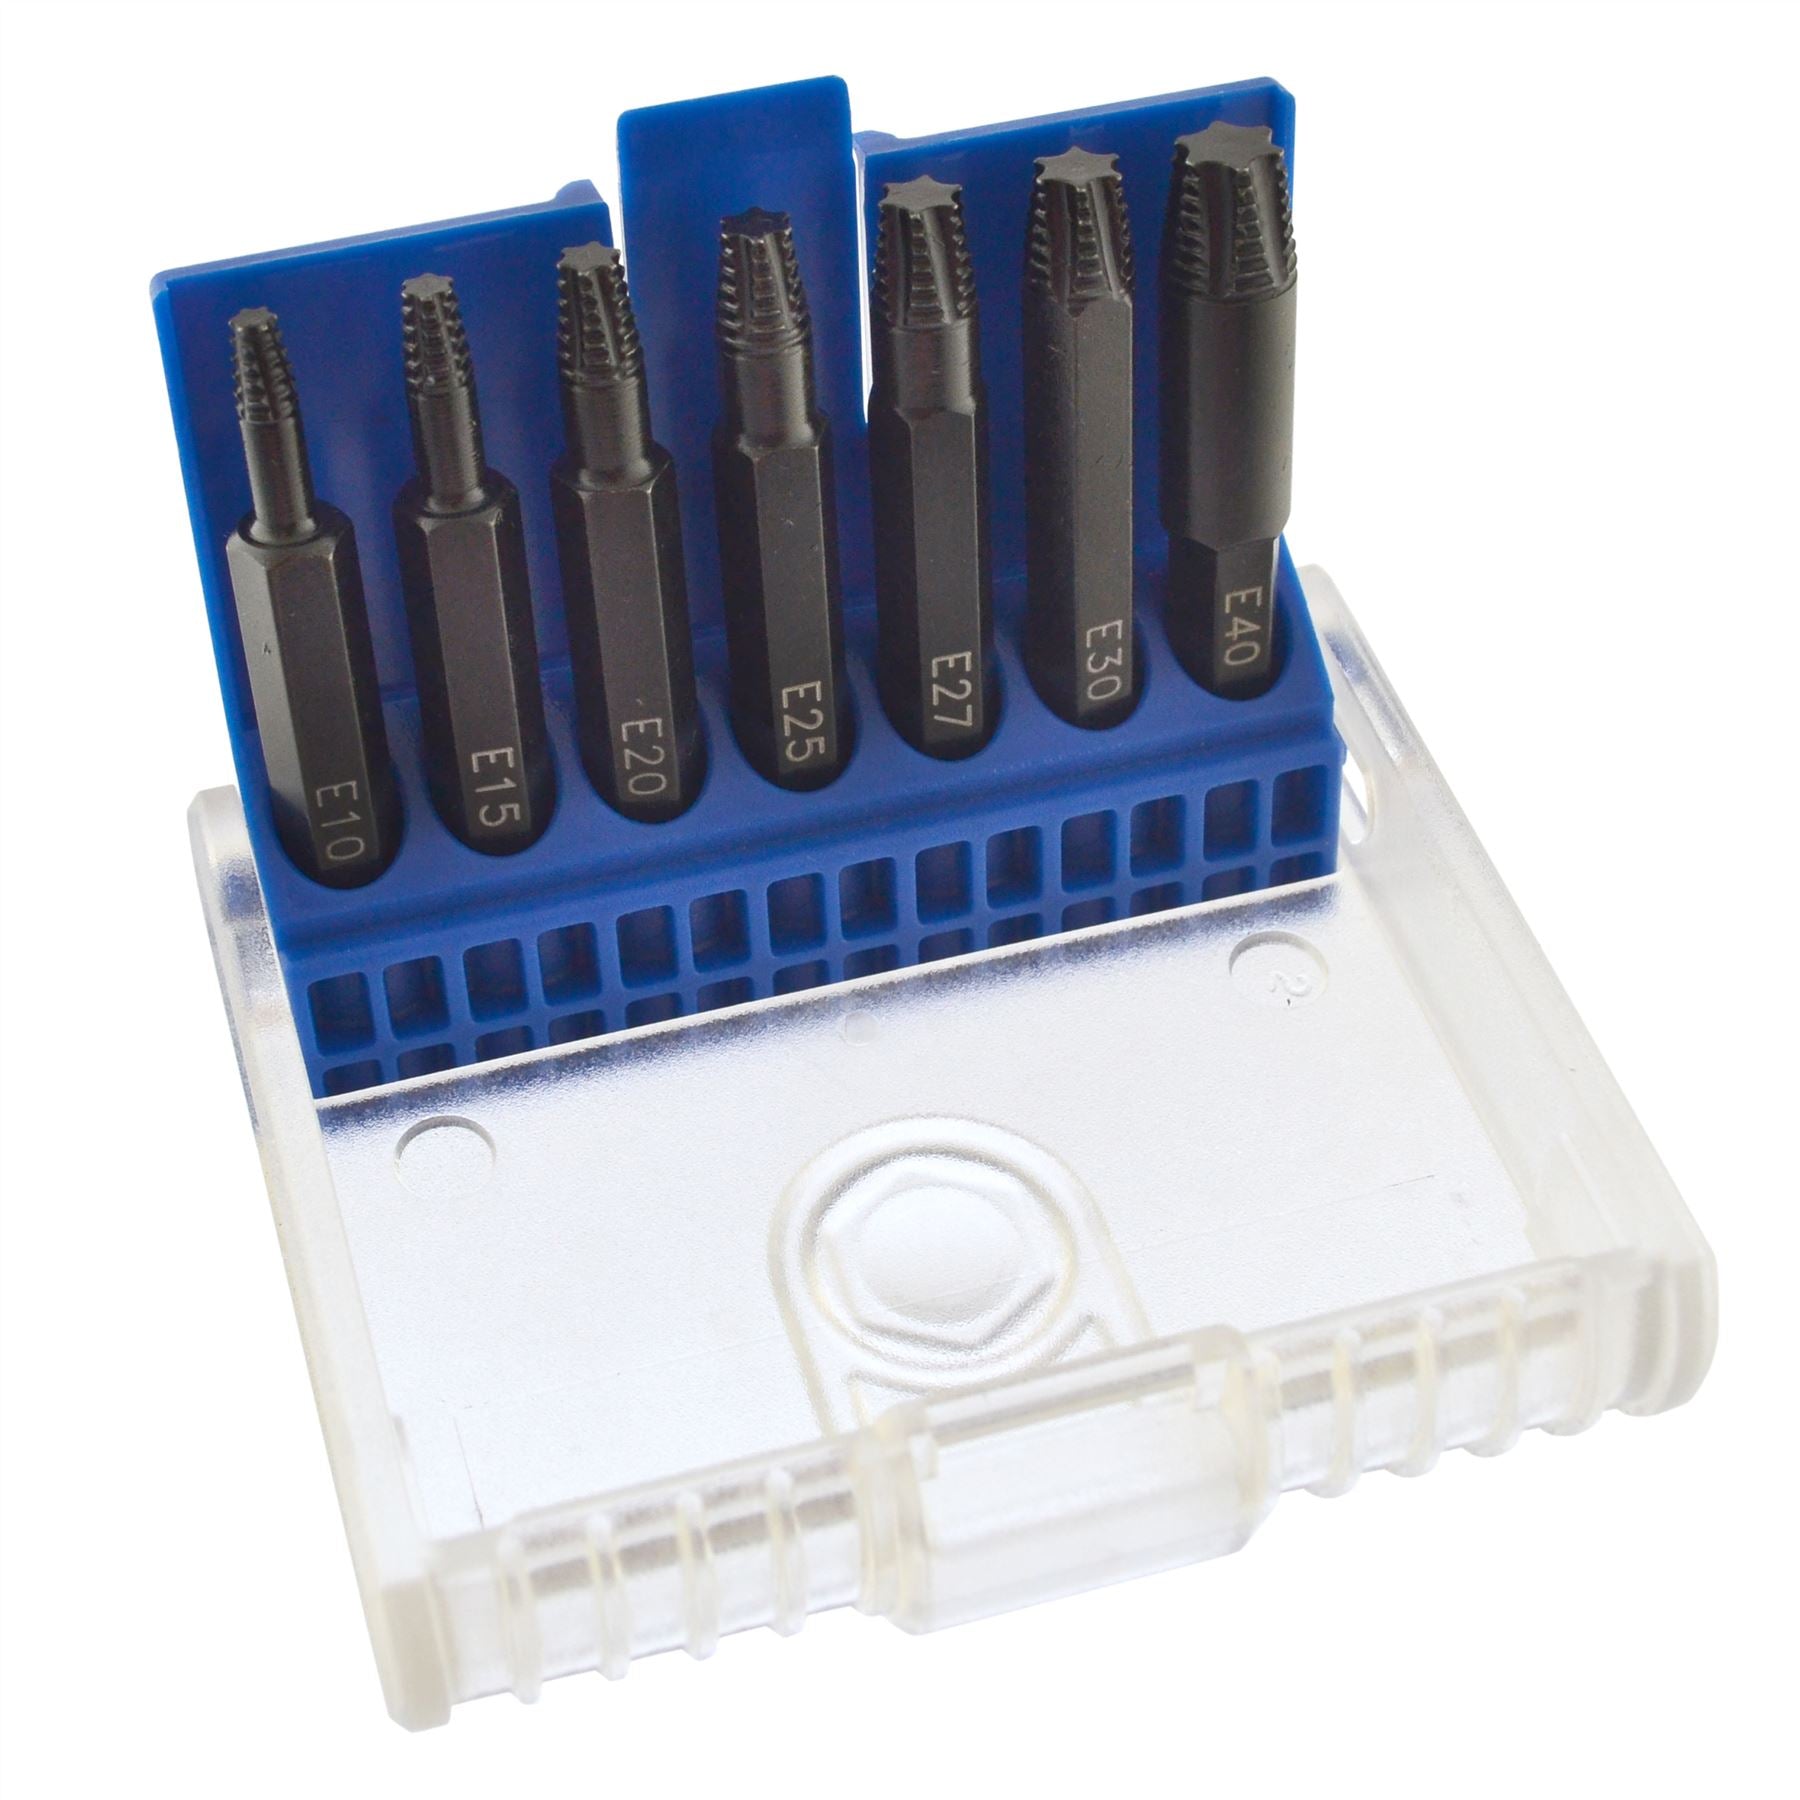 Extractor Remover Set For Torx Fittings Rusted Rounded Off Bits T10 - T40 LSR22